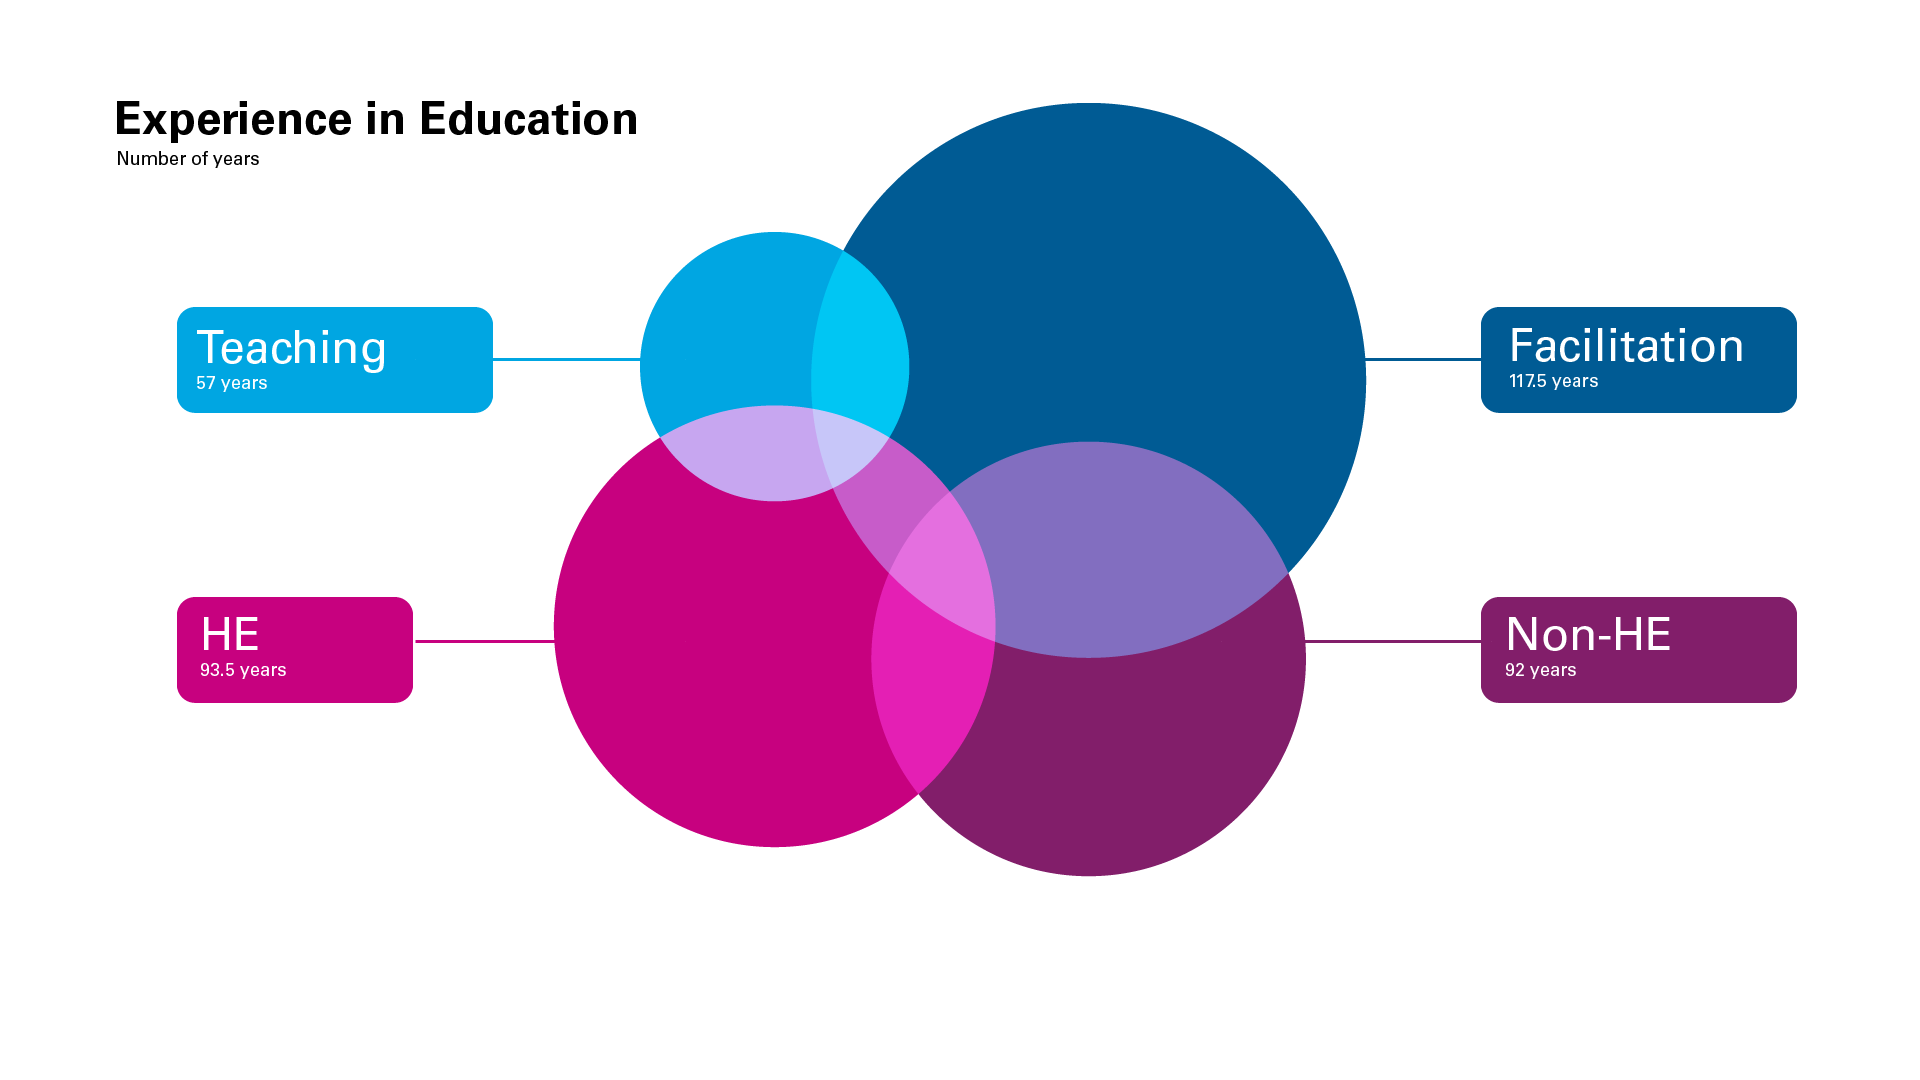 Data visualisation showing years of experience in education.